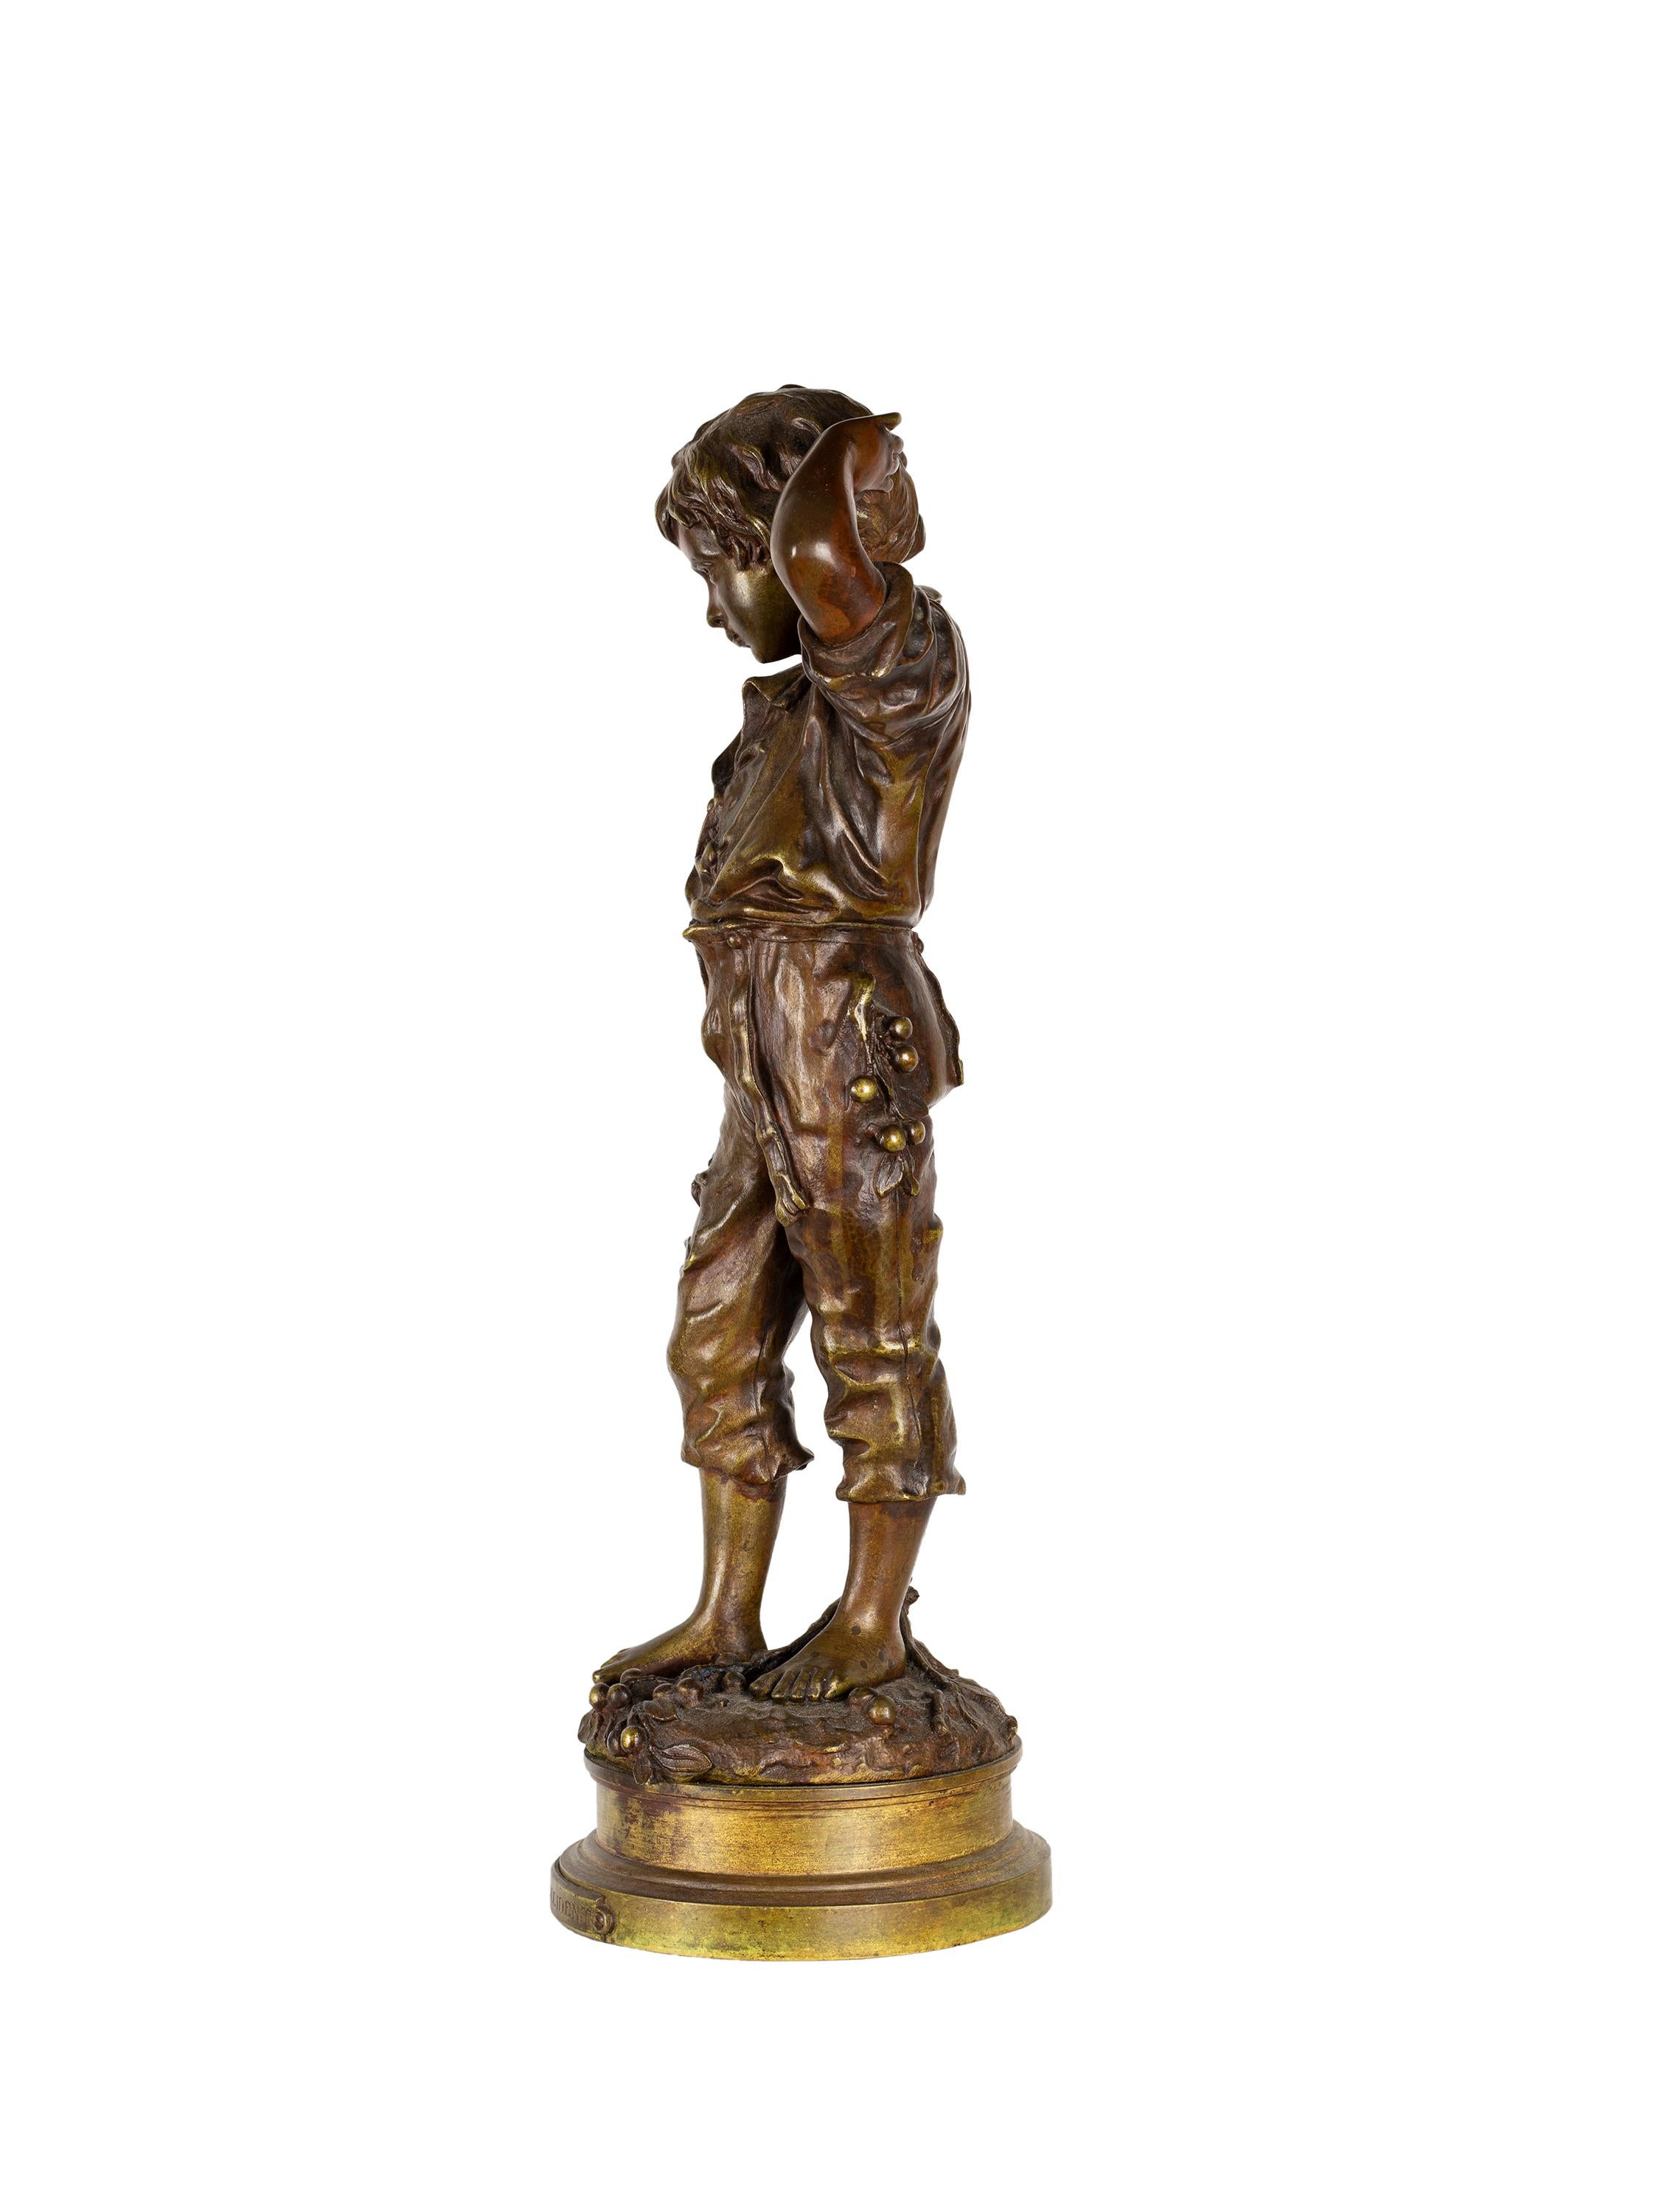 A Charles Anfrie (Catalan sculptor Charles Anfrie, 1833-1905)  bronze statue of a boy 
“C. Anfrie” signed with “ Vrai Bronze Garanti. Paris. BL” caster seal and titled 'Un accident' on a plaque.

